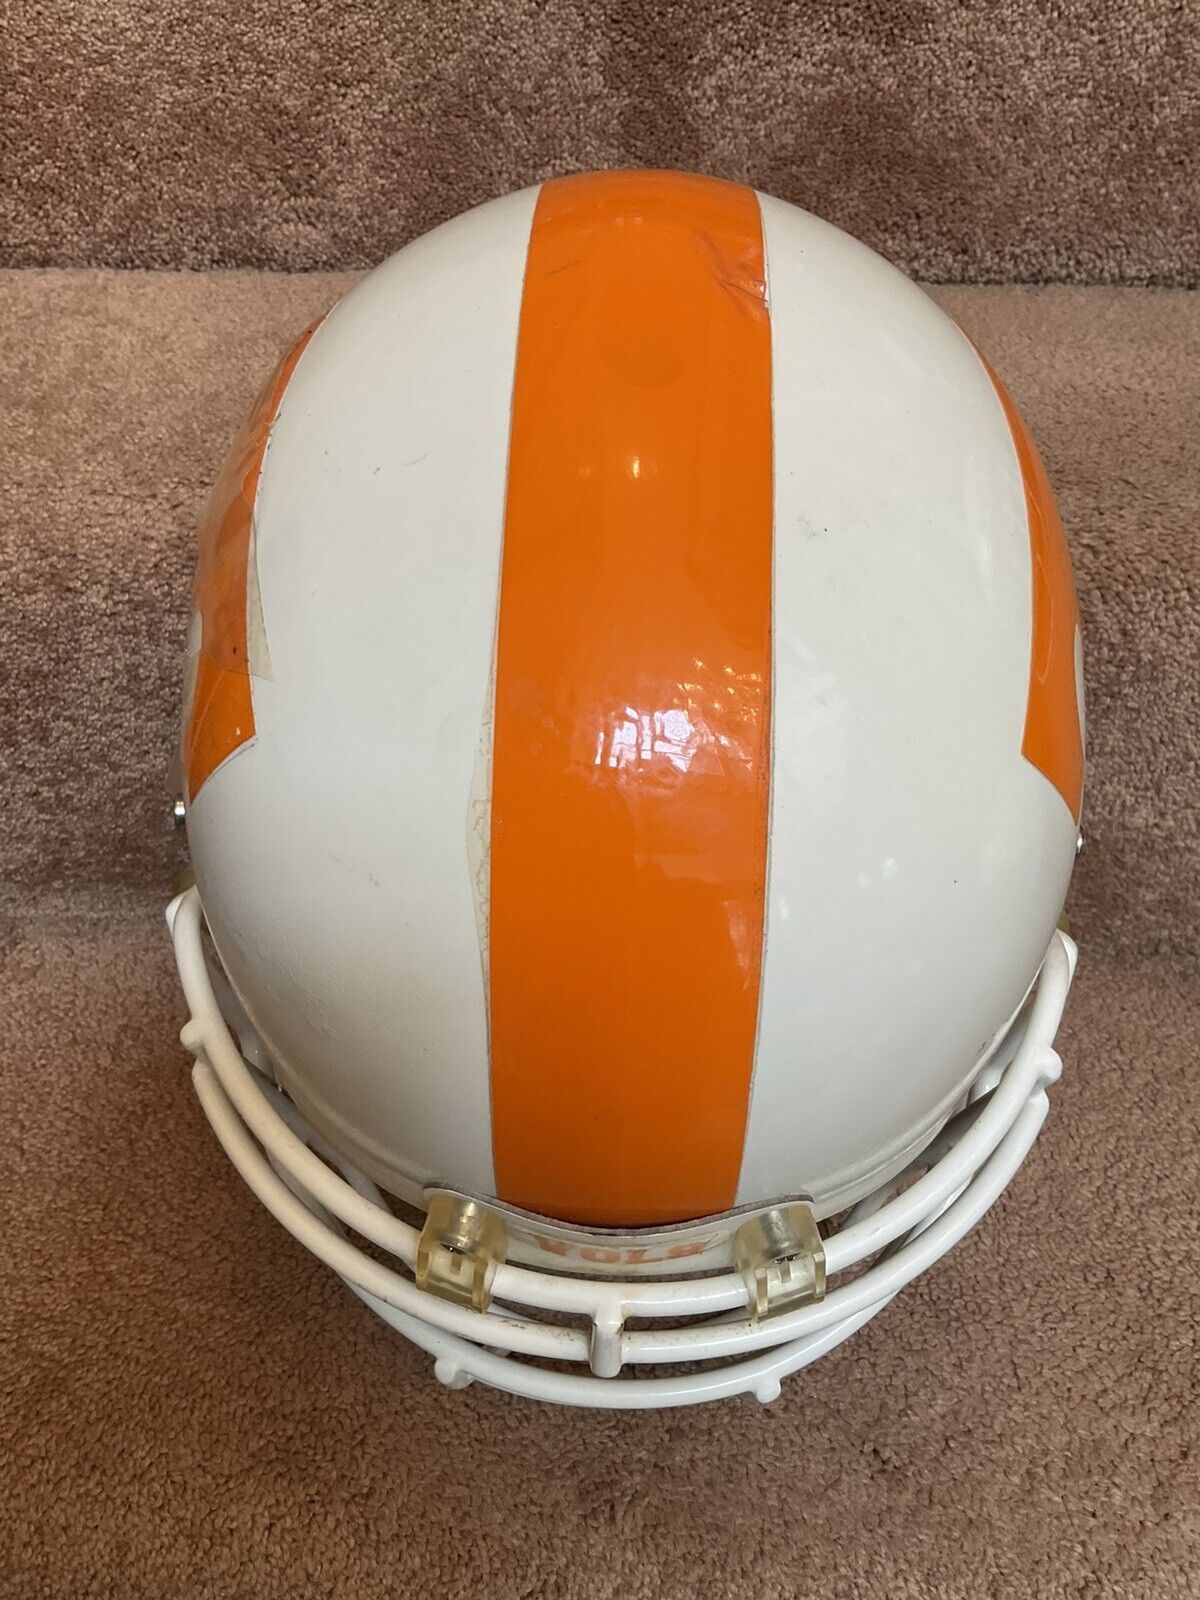 Adams A-One Size Large Football Helmet - Vintage Tennessee Volunteers Decals Sports Mem, Cards & Fan Shop:Fan Apparel & Souvenirs:College-NCAA Riddell   